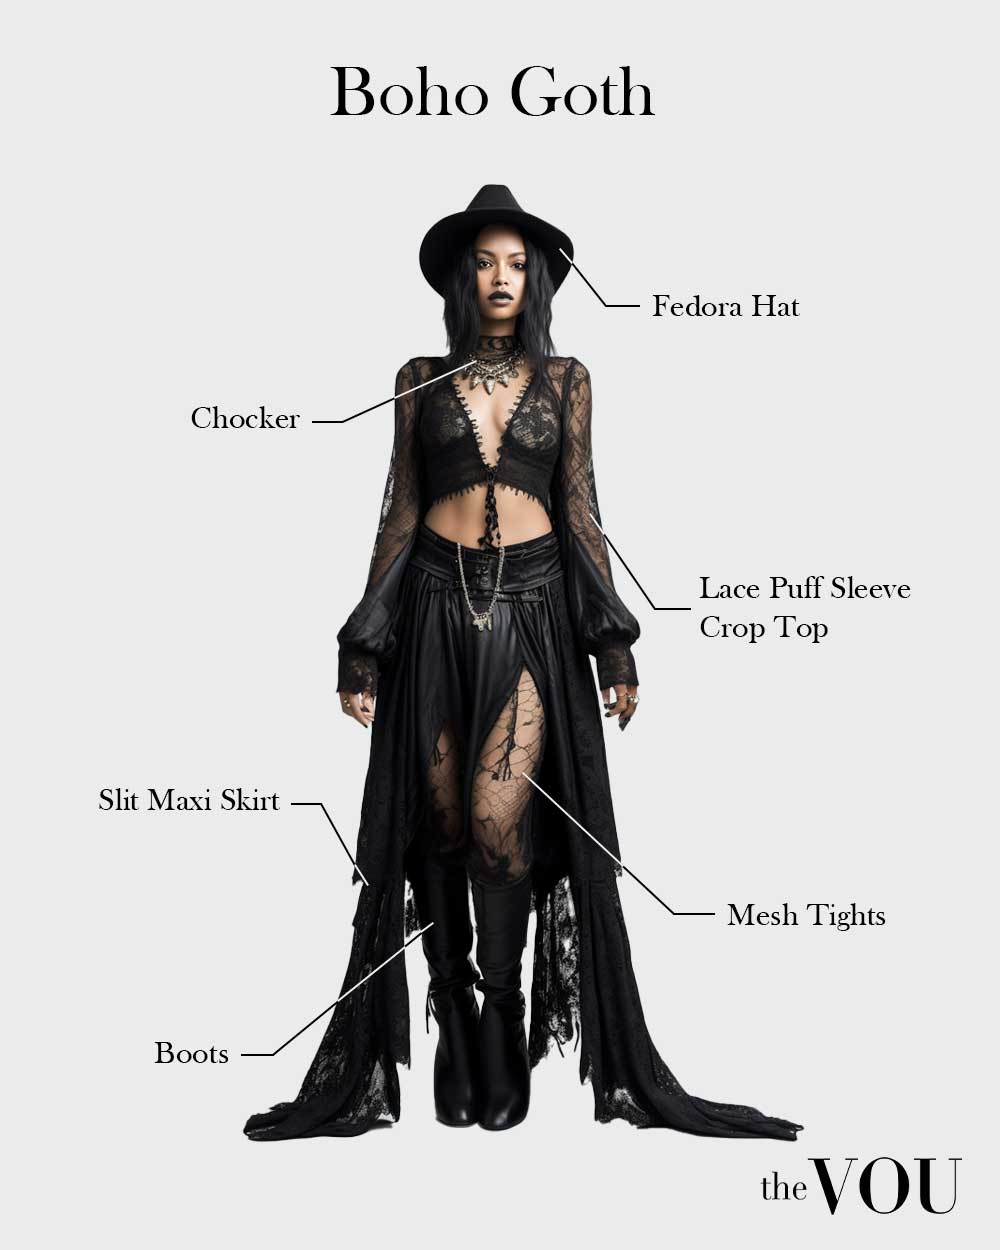 goth boho outfit: fedora hat, chocker, lace puff sleeve crop top, mesh thighs, slit maxi skirt, boots